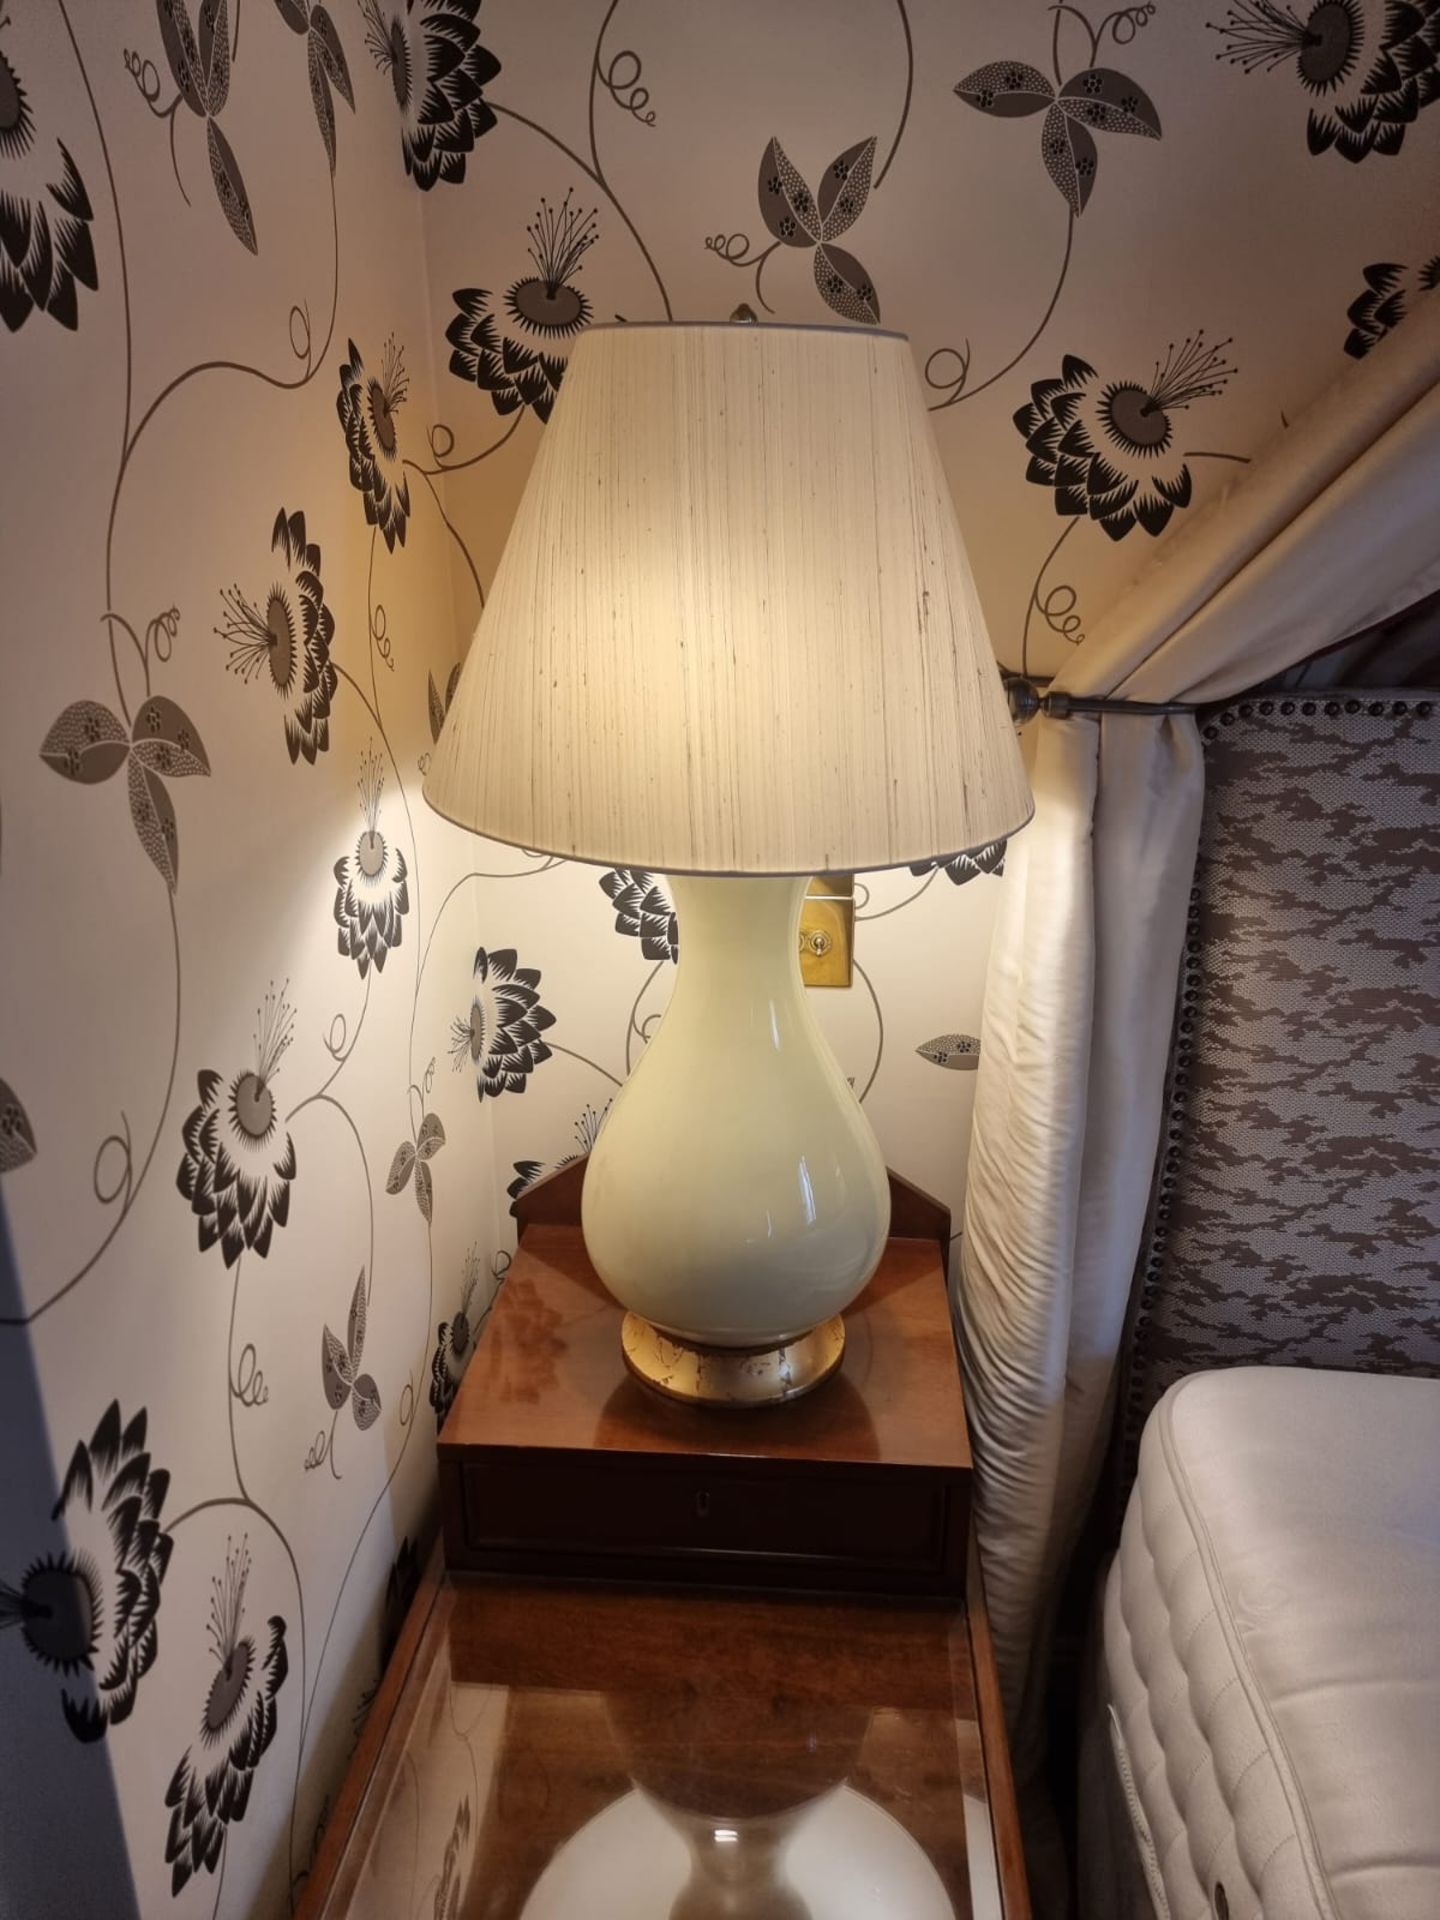 A Pair Of Heathfield And Co Louisa Glazed Ceramic Table Lamp With Textured Shade 77cm Room 619 - Image 2 of 2